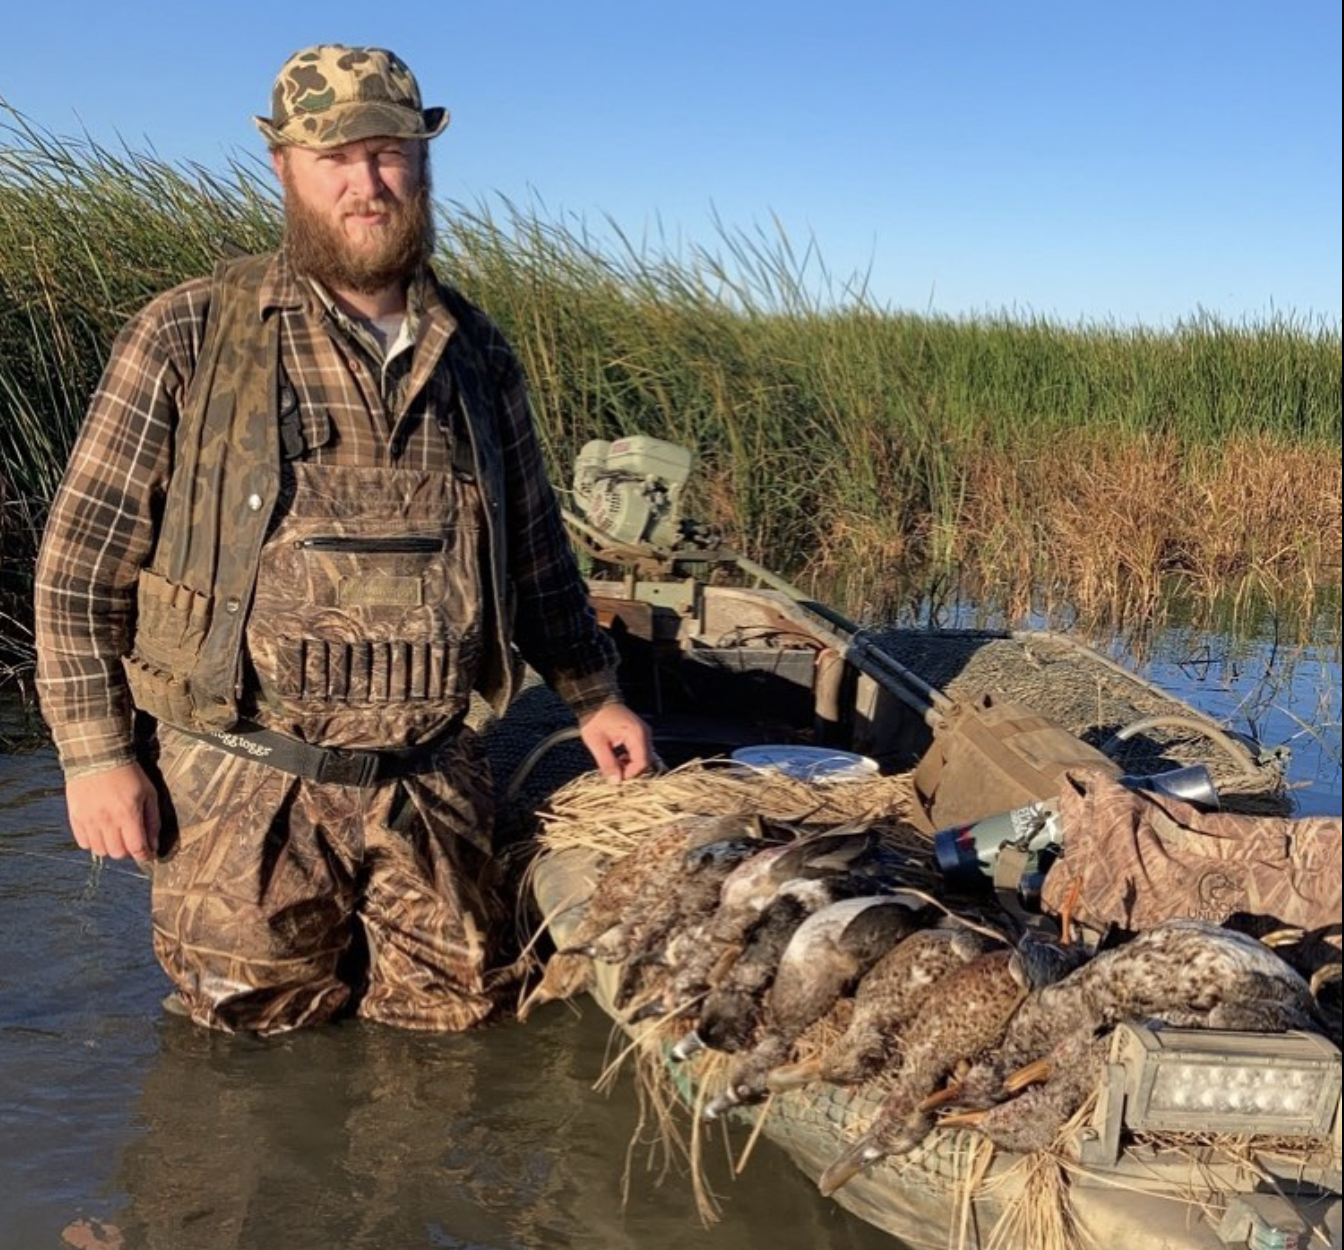 Grant Doyle with limits of ducks.